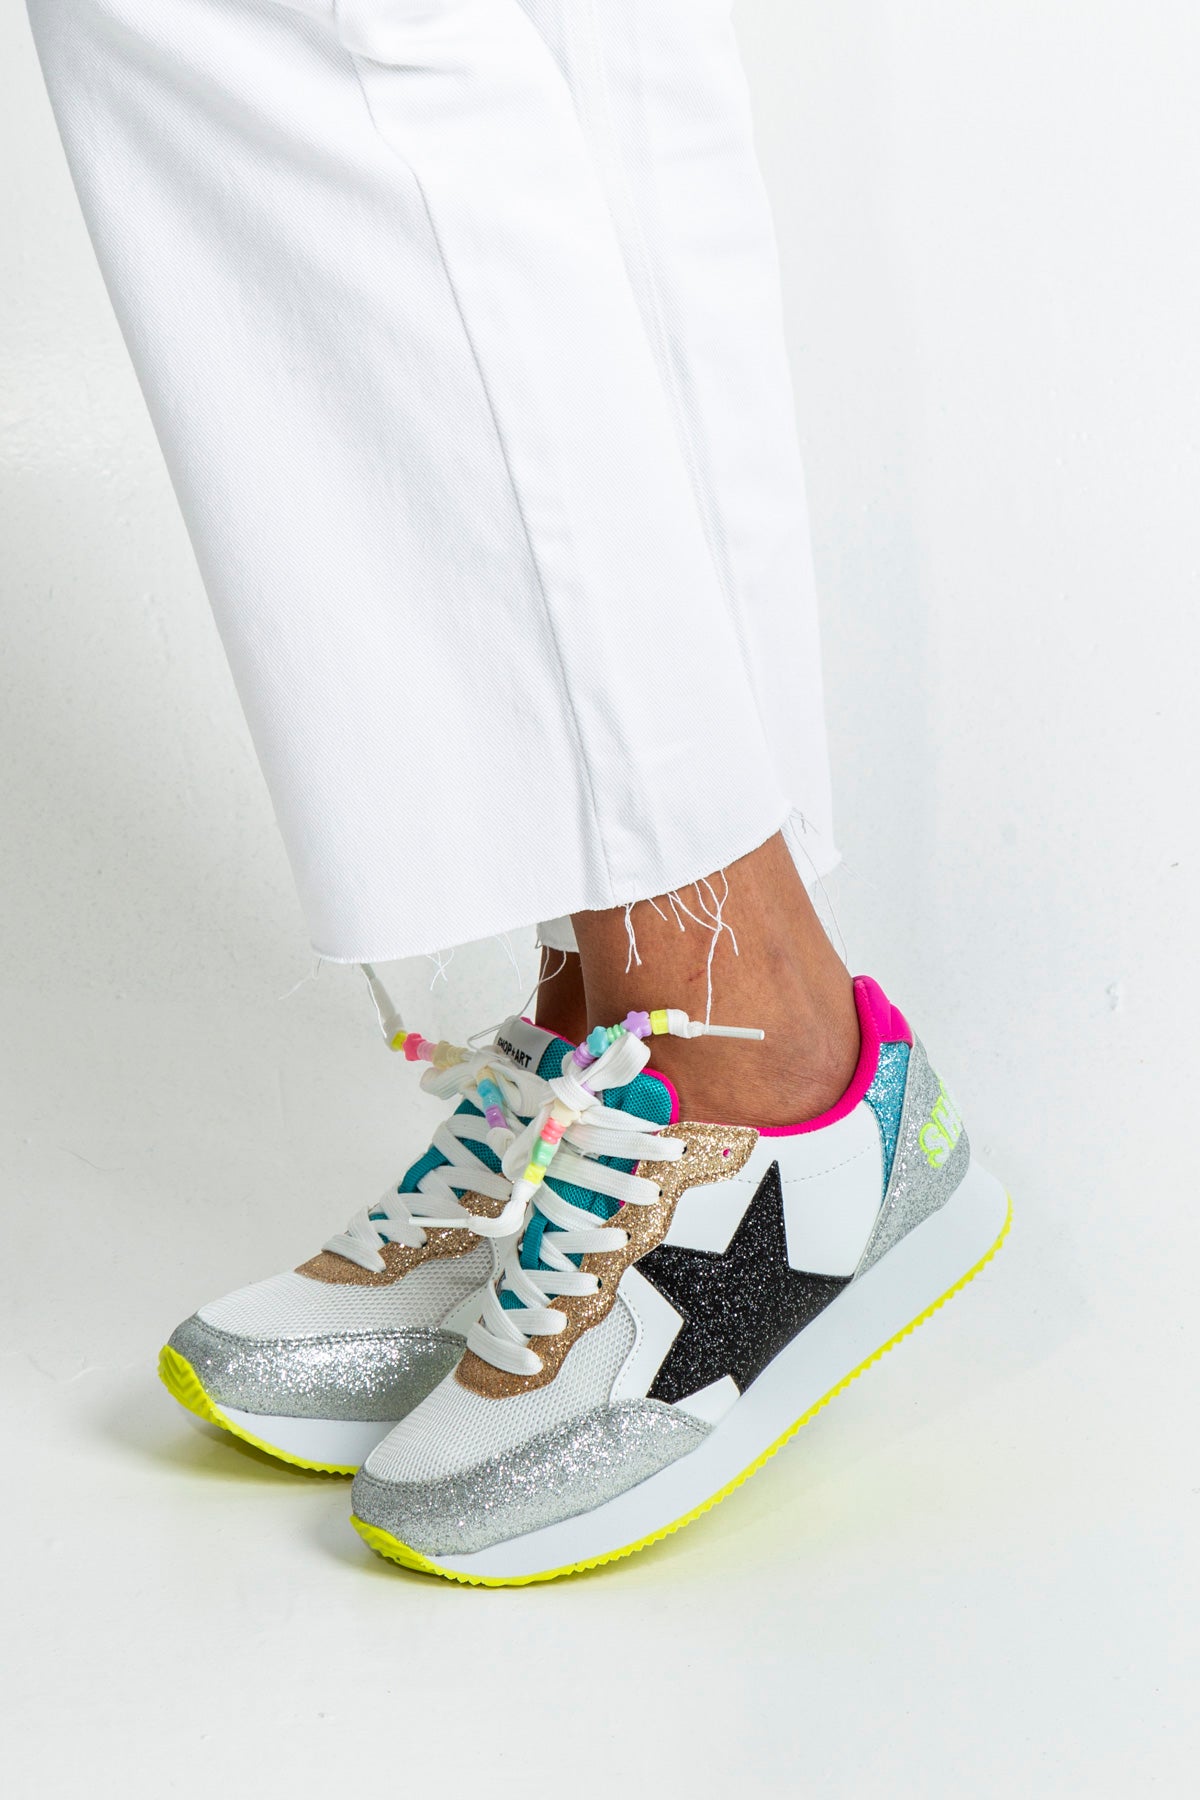 Sporty-chic sneakers